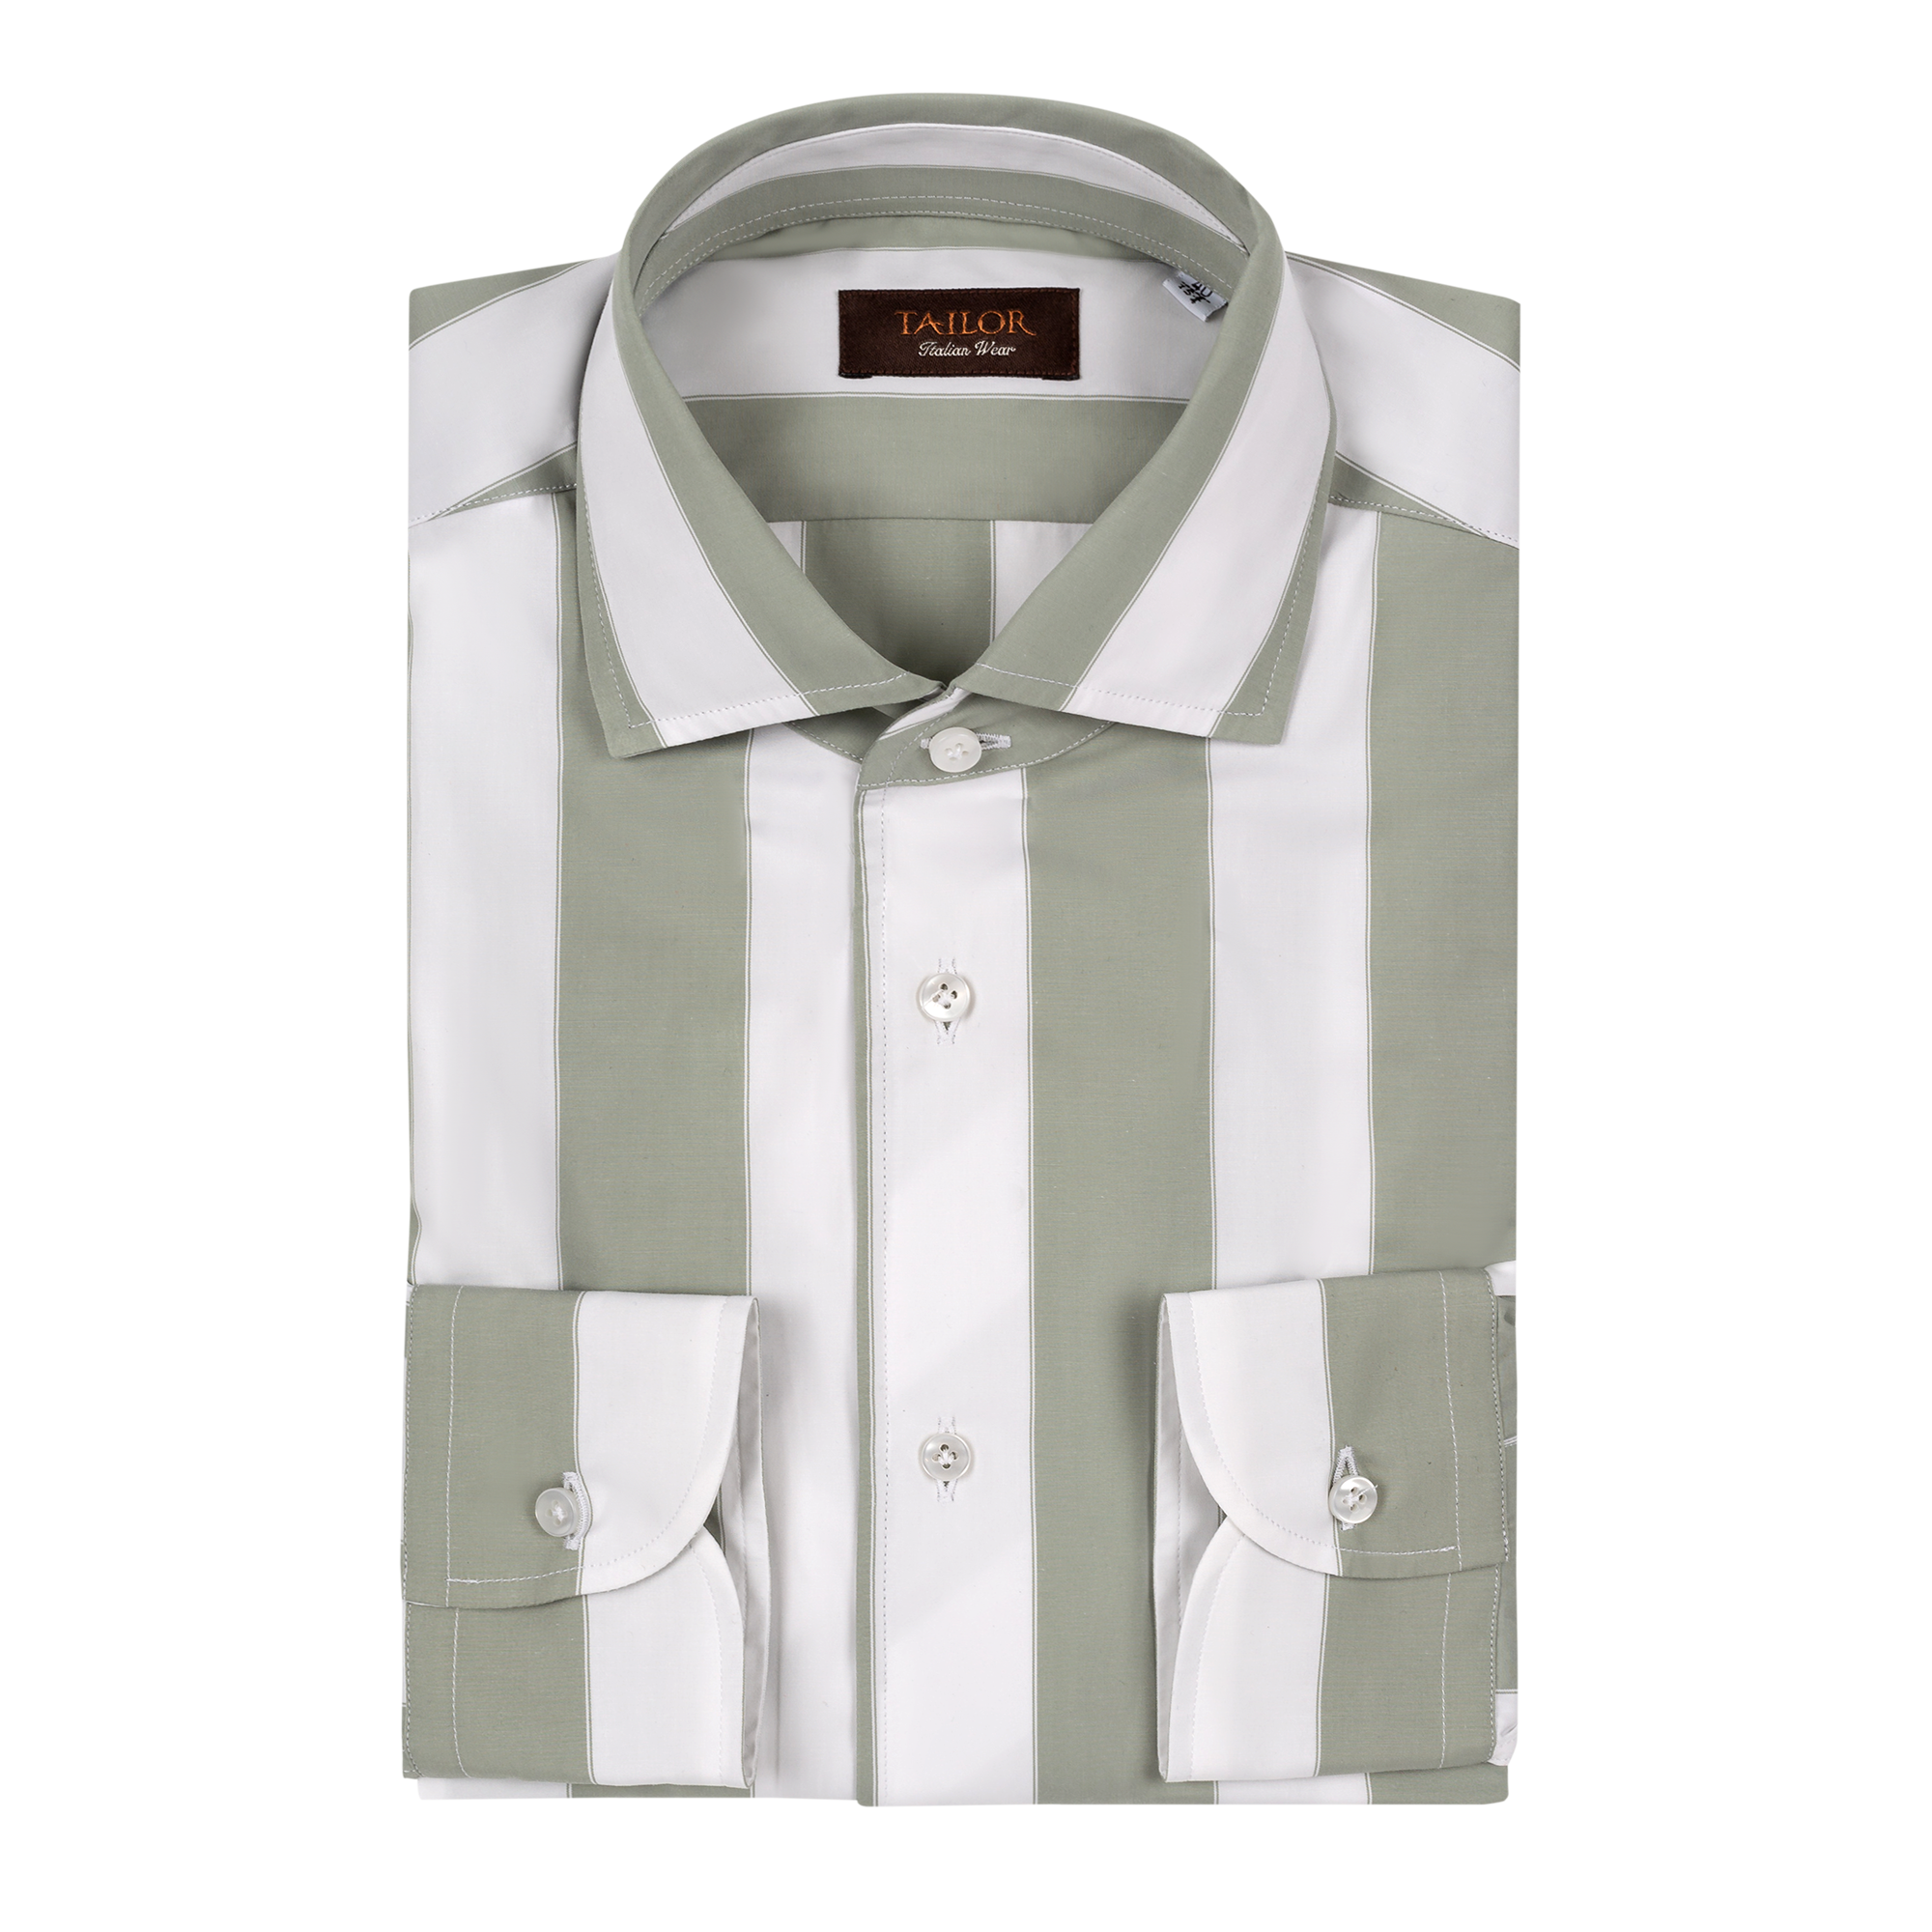 Mineral green bold striped shirt with paramontura